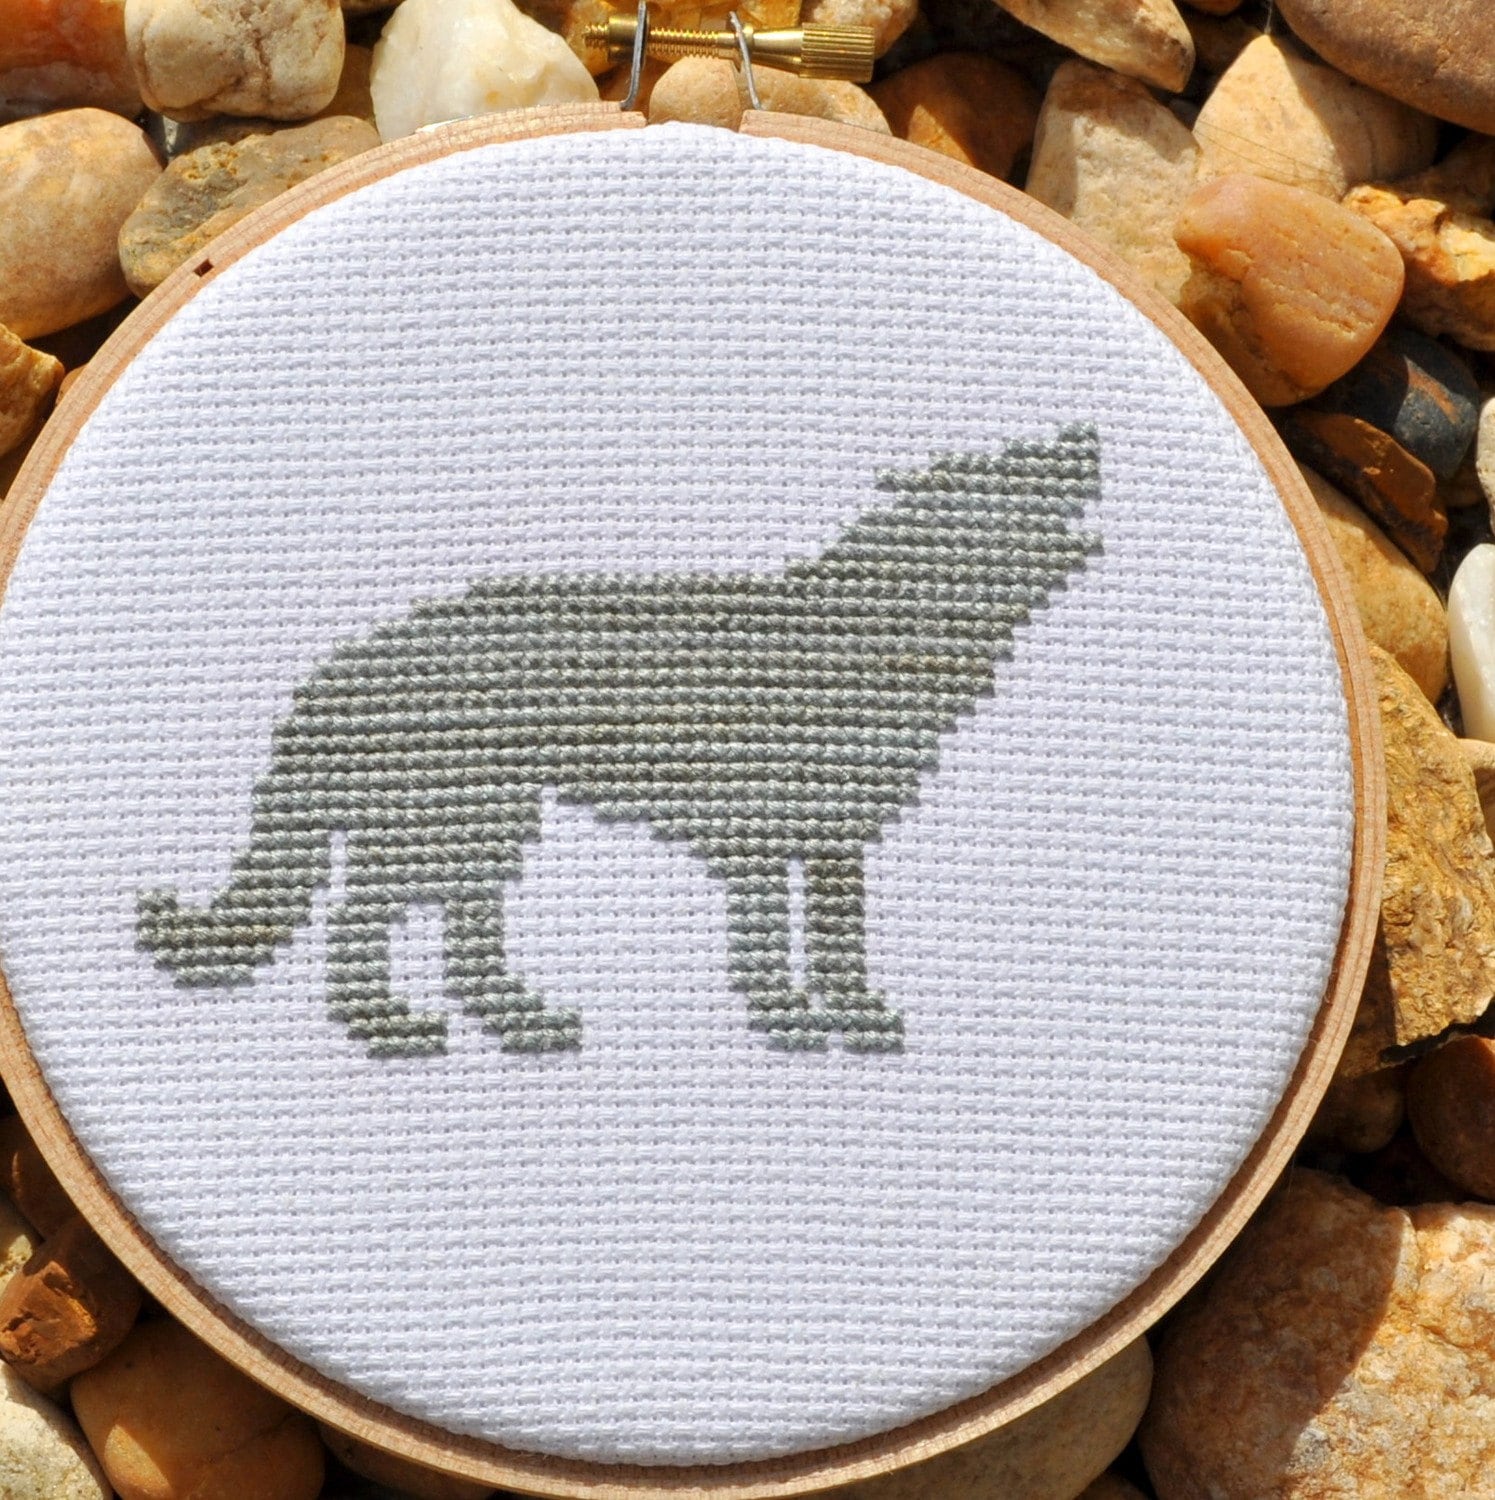 Wolf Silhouette Counted Cross Stitch Pattern PDF, Pick your own colors